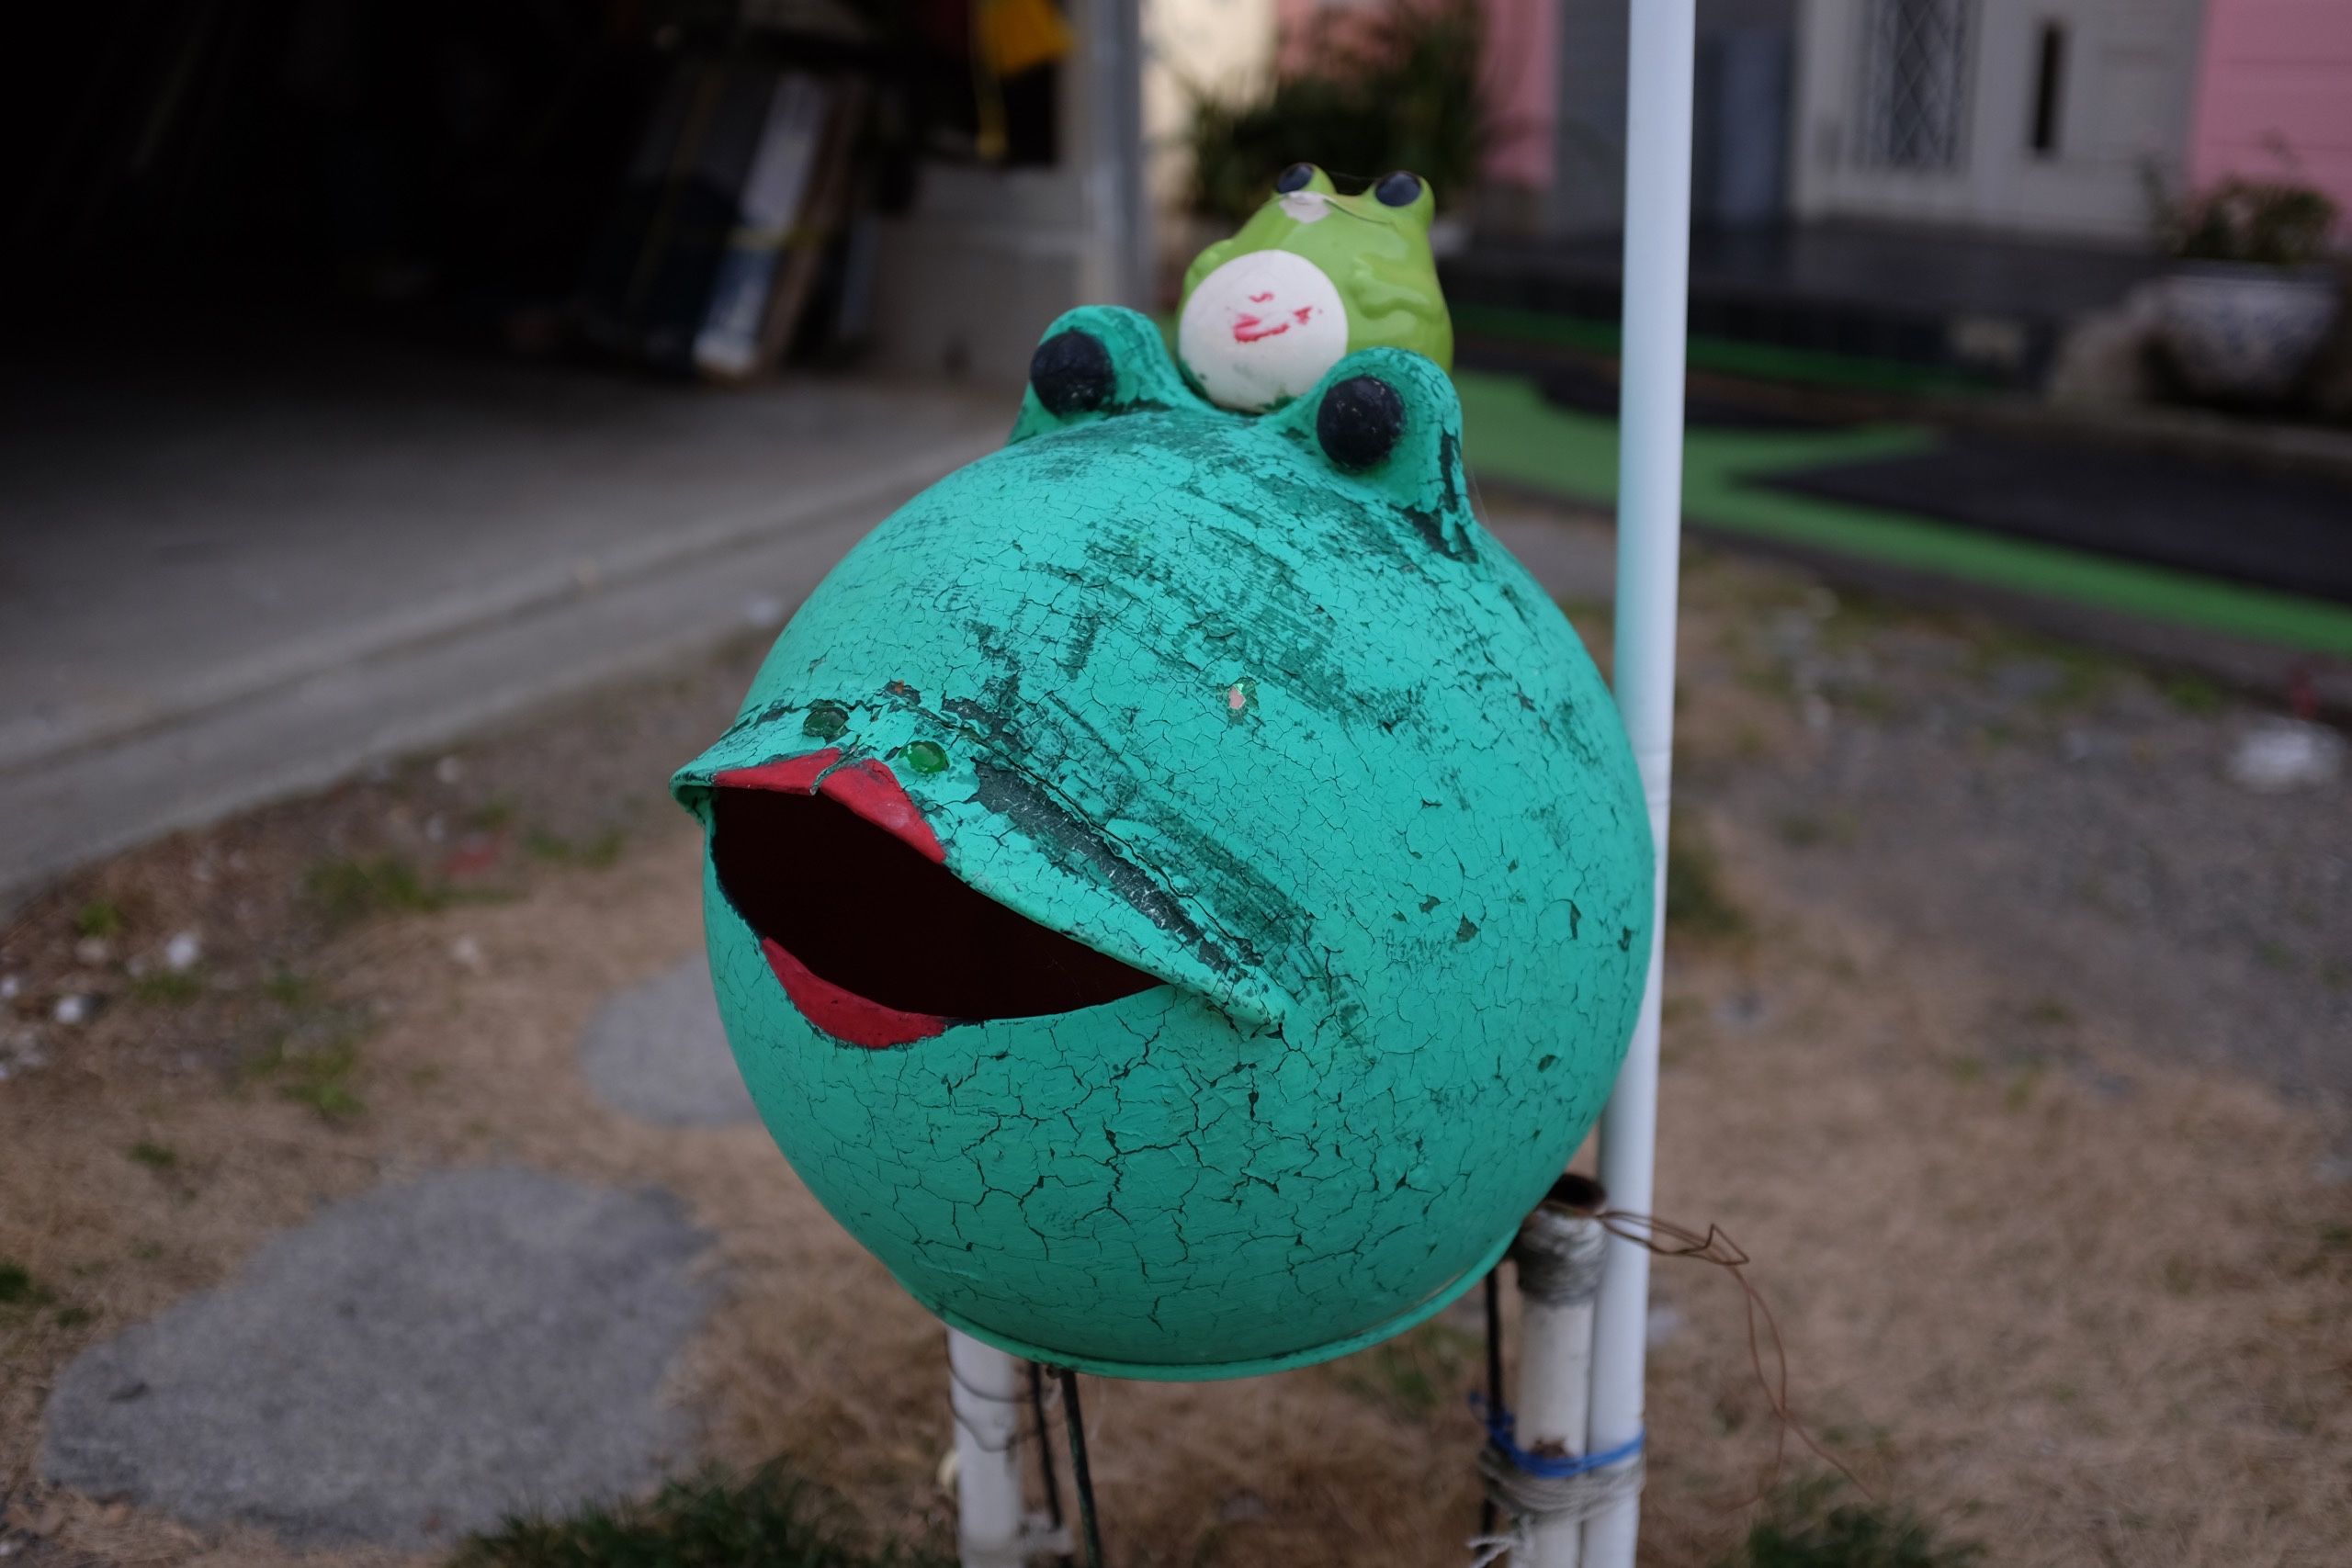 An old buoy painted to look like a frog wearing red lipstick.